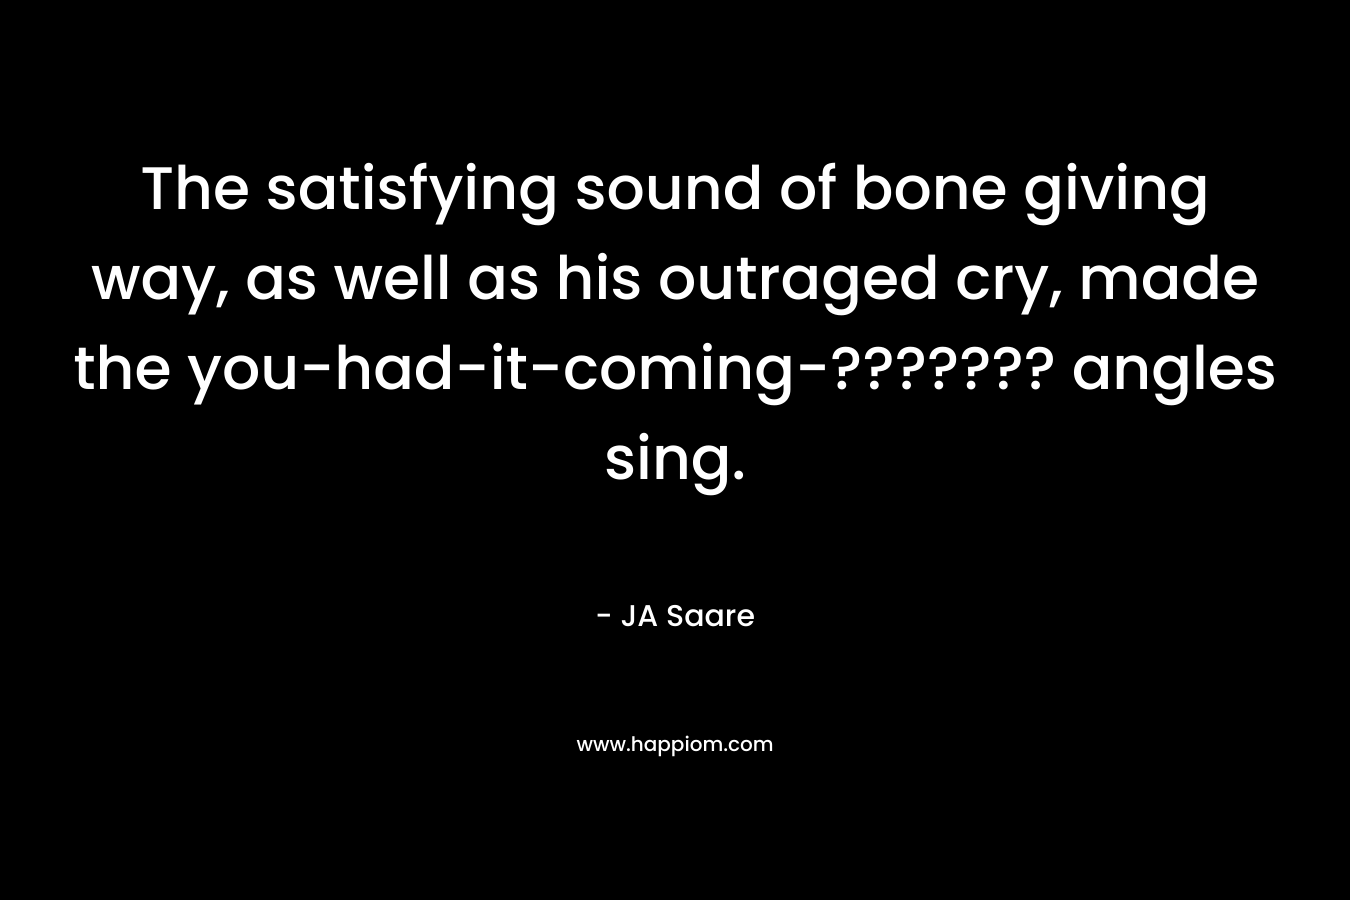 The satisfying sound of bone giving way, as well as his outraged cry, made the you-had-it-coming-??????? angles sing. – JA Saare